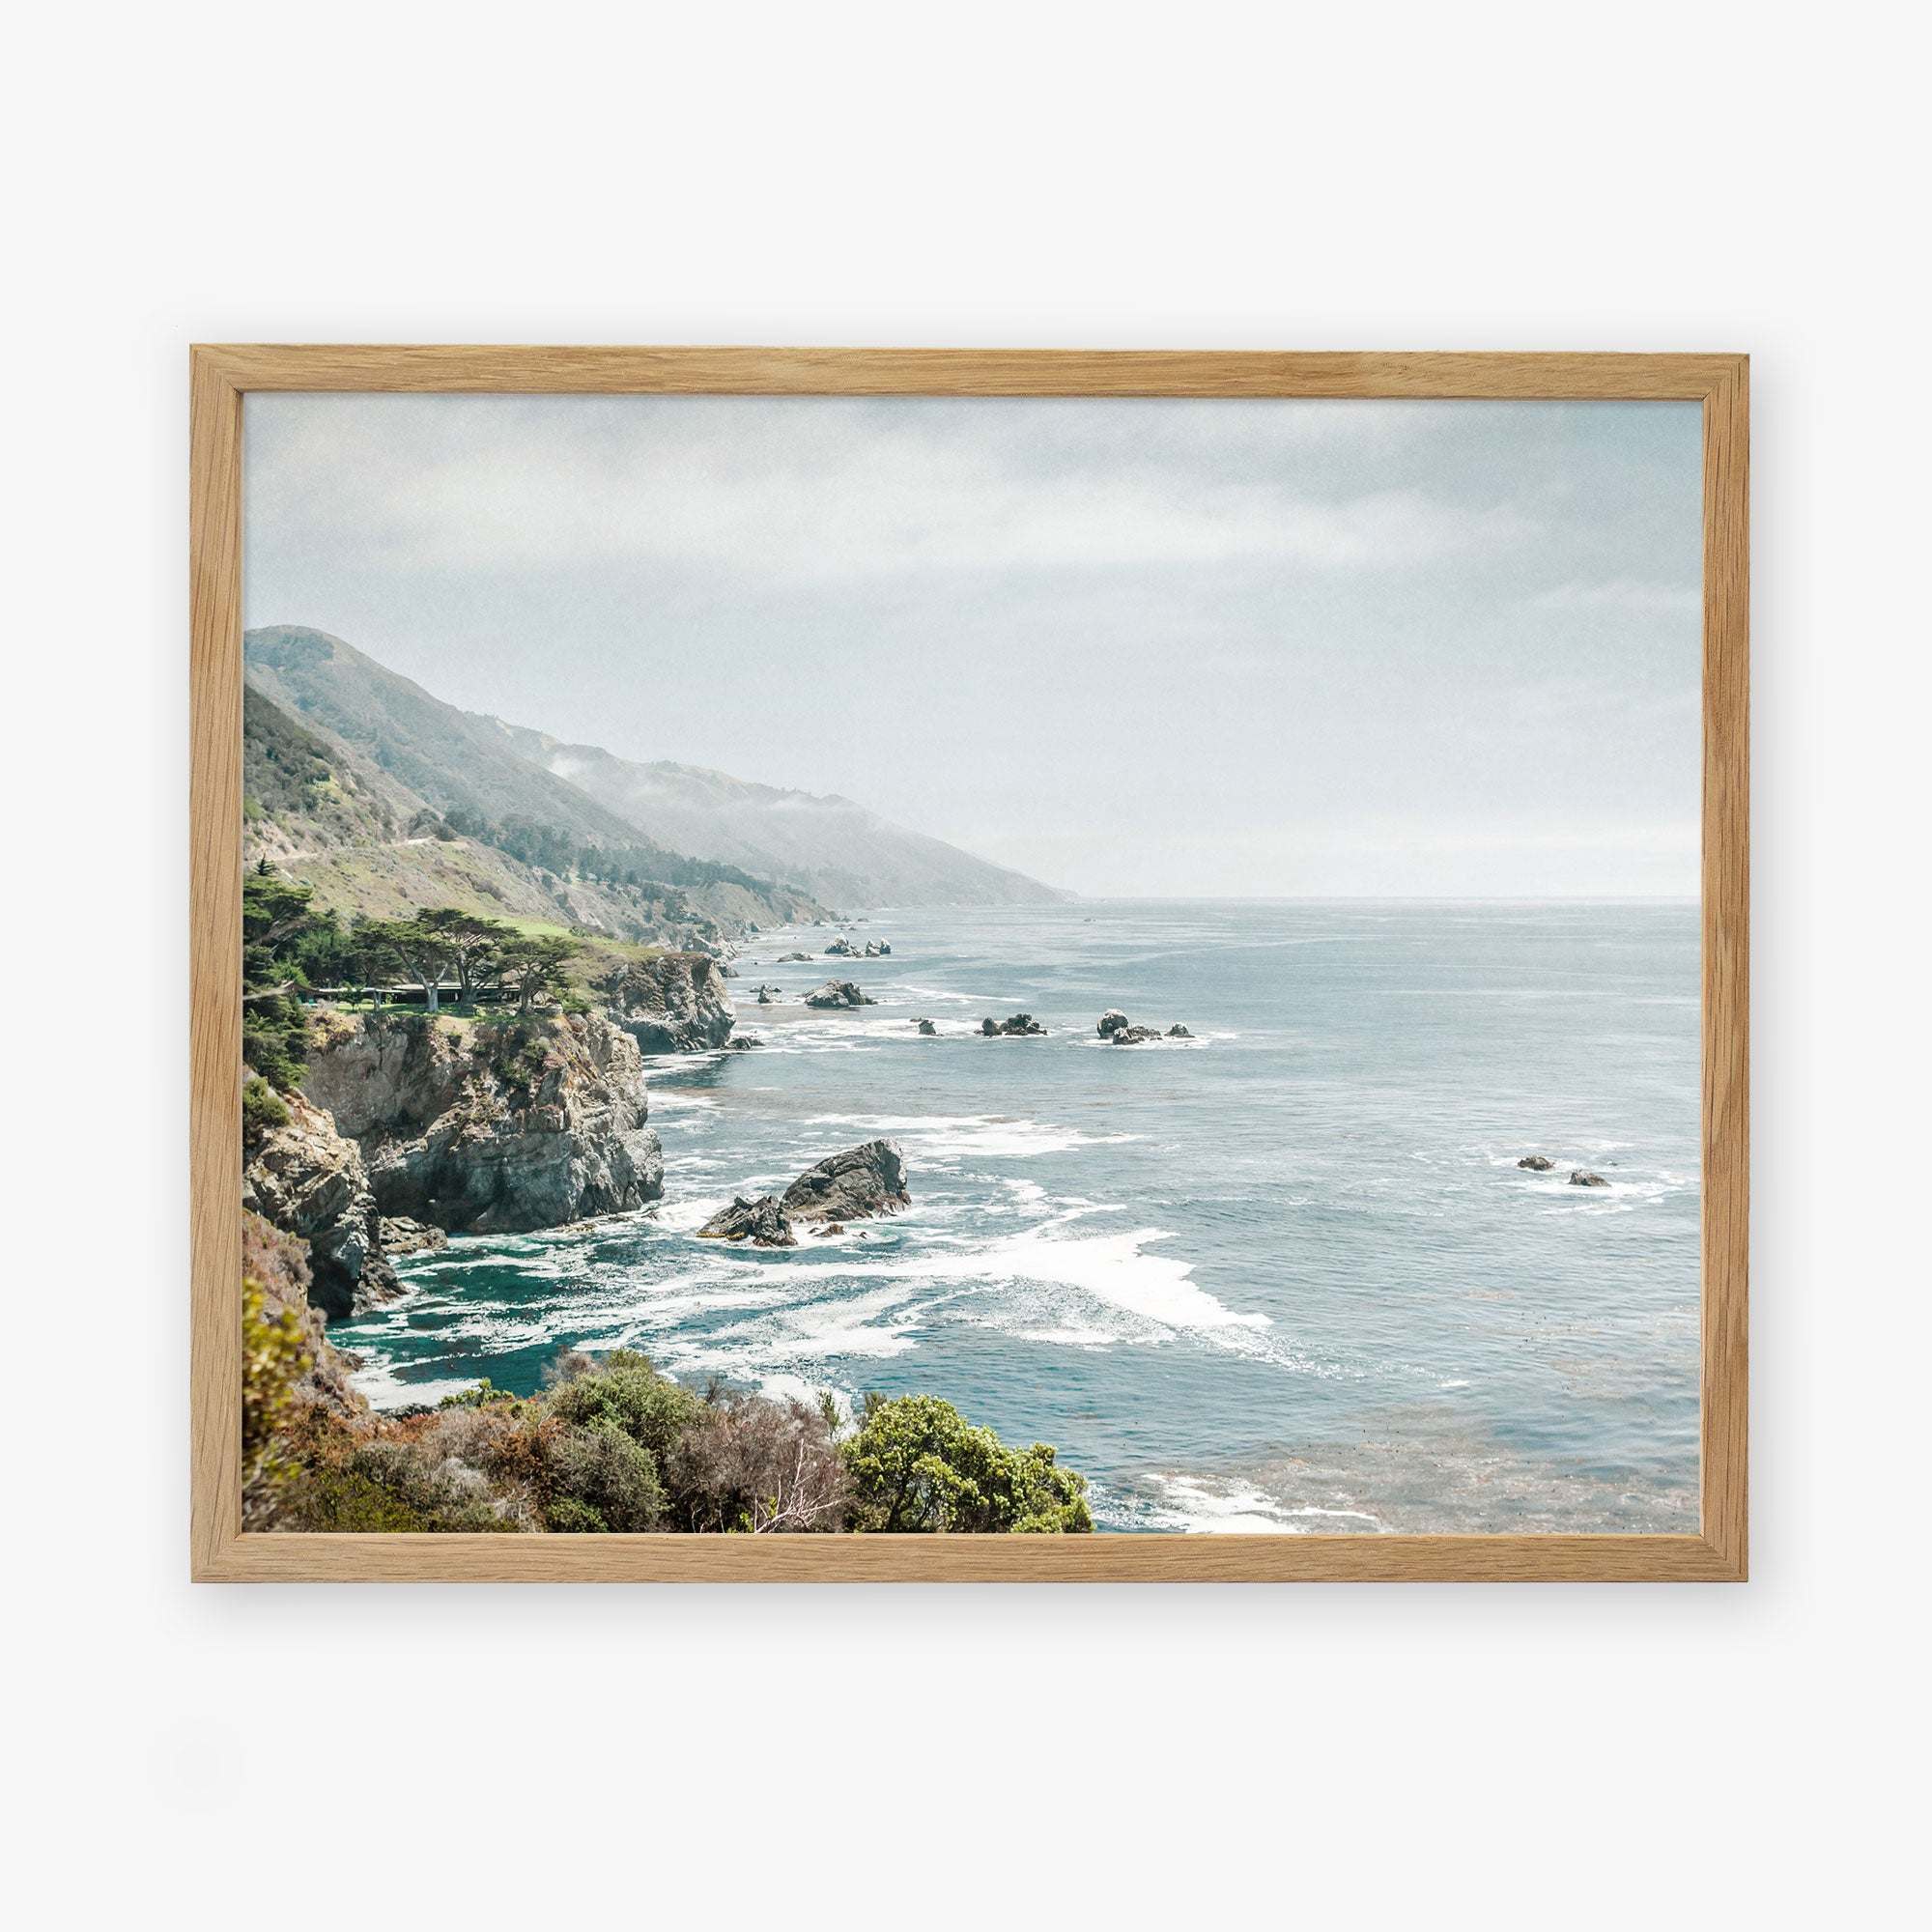 A framed archival photographic print depicting a serene coastal landscape along California Highway 1, with rocky cliffs and a vibrant blue ocean stretching into the distance under a hazy sky. The Big Sur Landscape Print by Offley Green captures the beauty of &#39;Rocky Rocks&#39;.